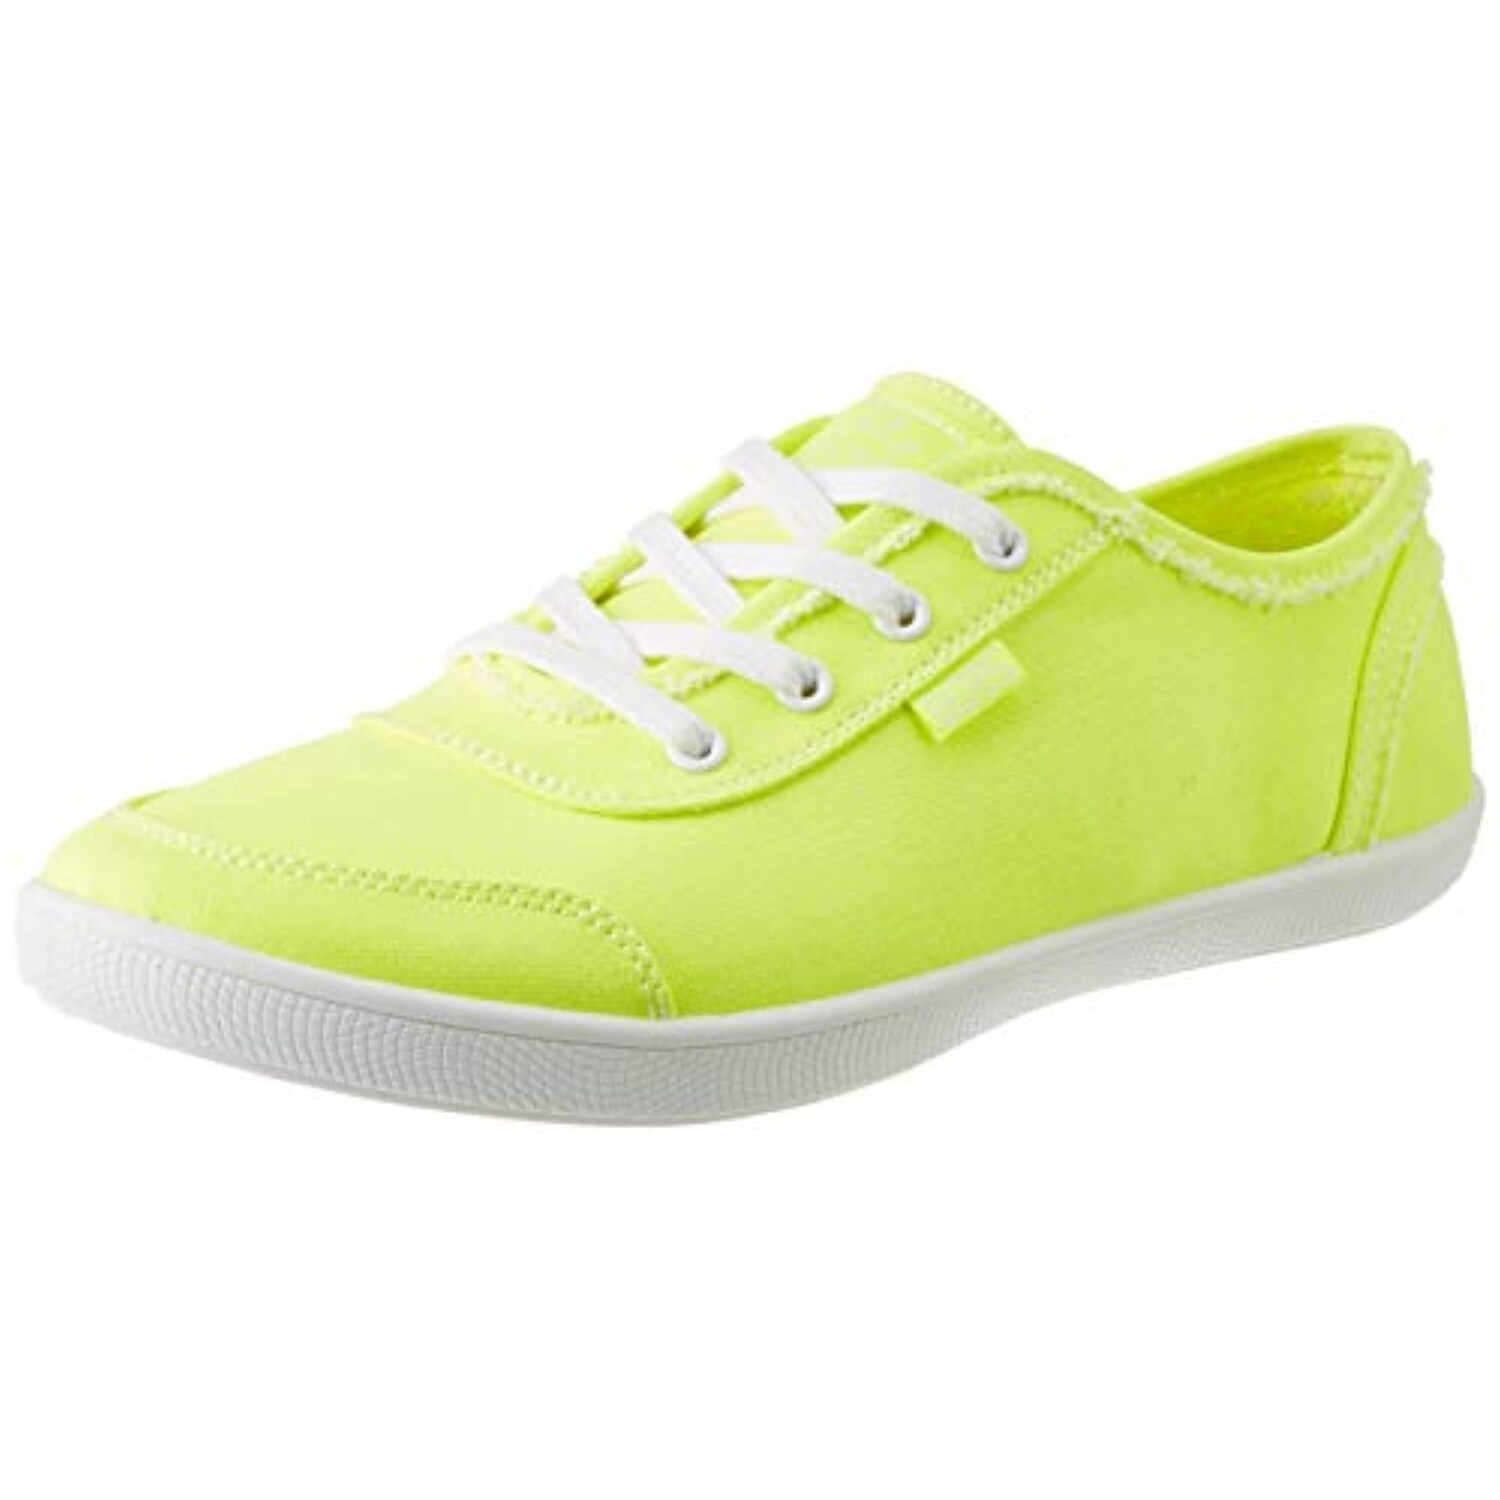 neon green trainers womens